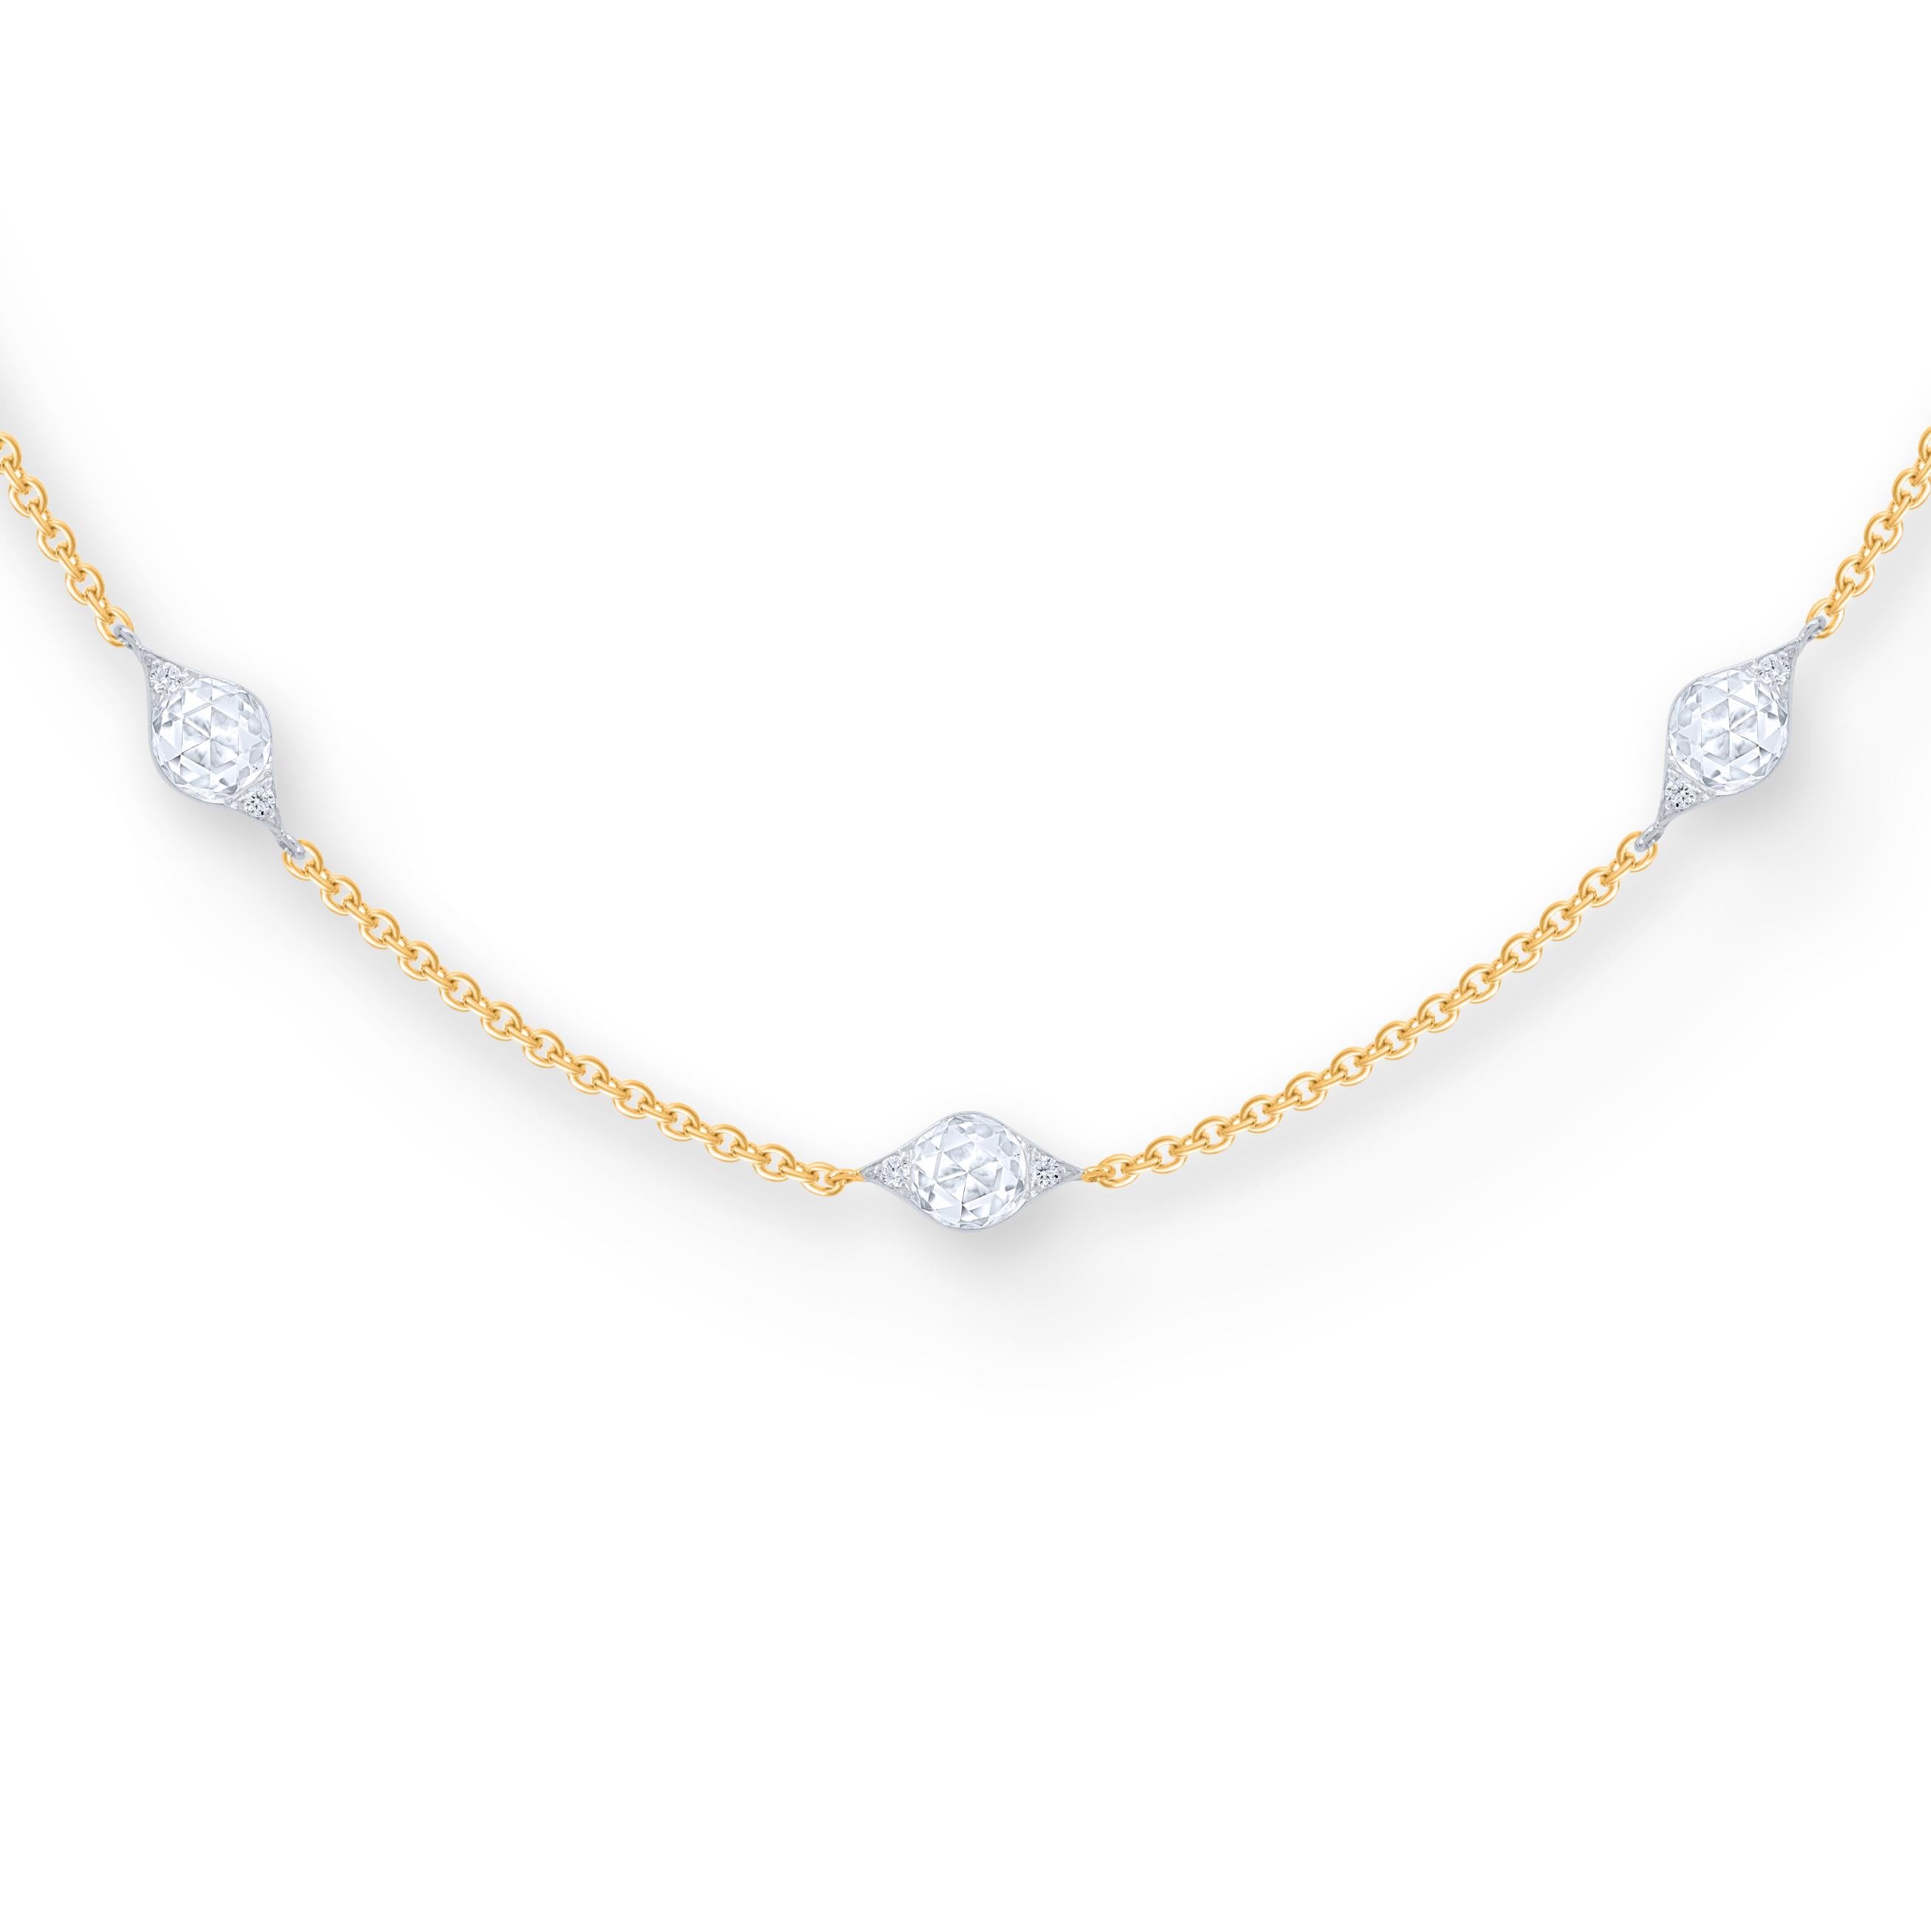 Inspired by the grand Indian havelis of yesteryear, this contemporary station necklace is crafted in 18 KT yellow gold and studded with 60 brilliant cut and 15 rose cut round diamonds. The total diamond weight is 1.40 carats. All our diamonds are